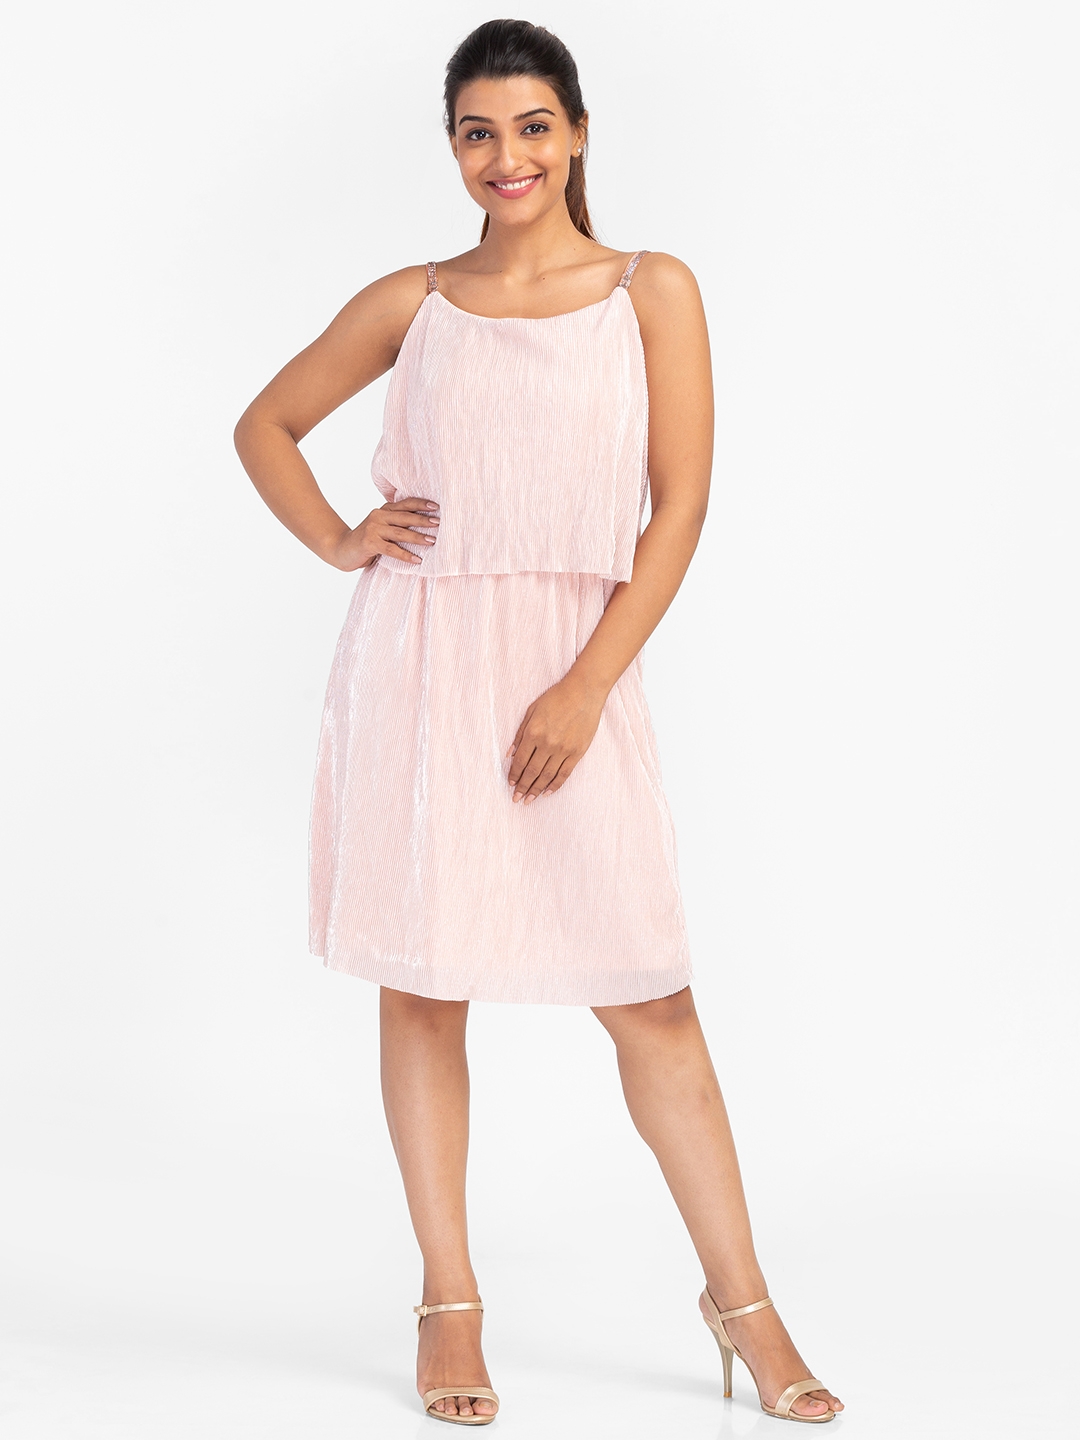 Globus Pink Self Design Fit and Flare Party Dress